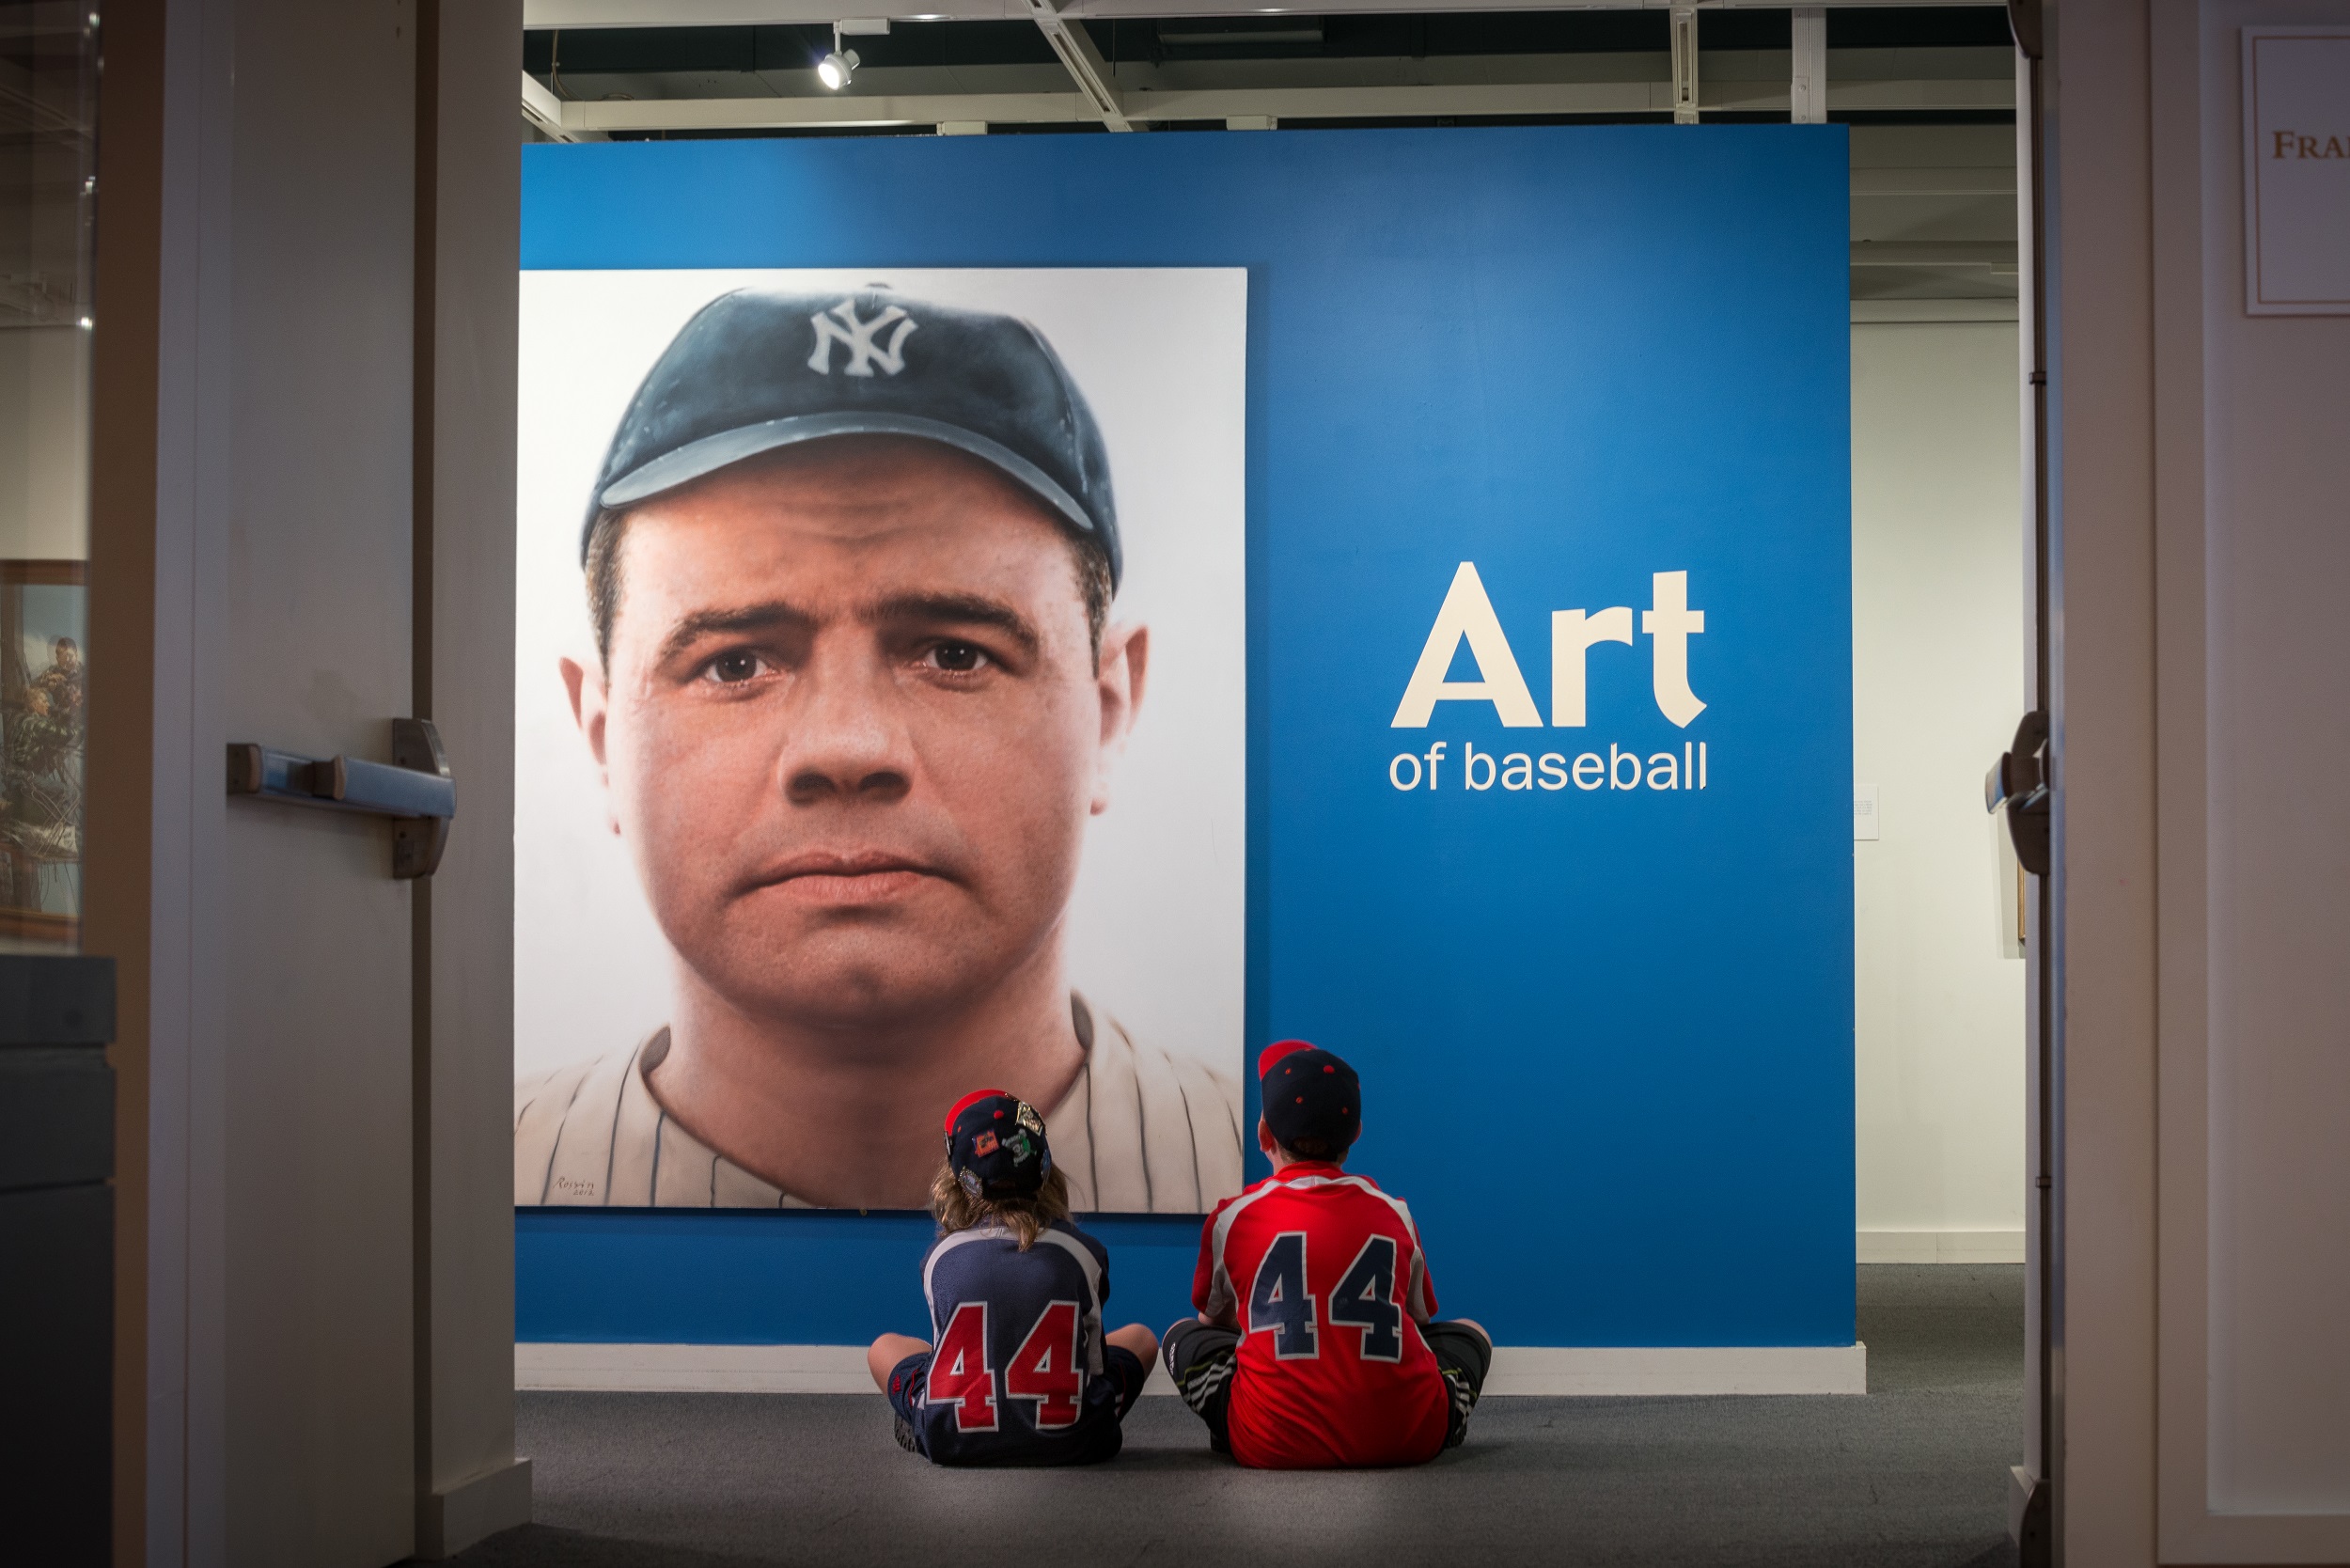 National Baseball Hall of Fame and Museum - In baseball, the